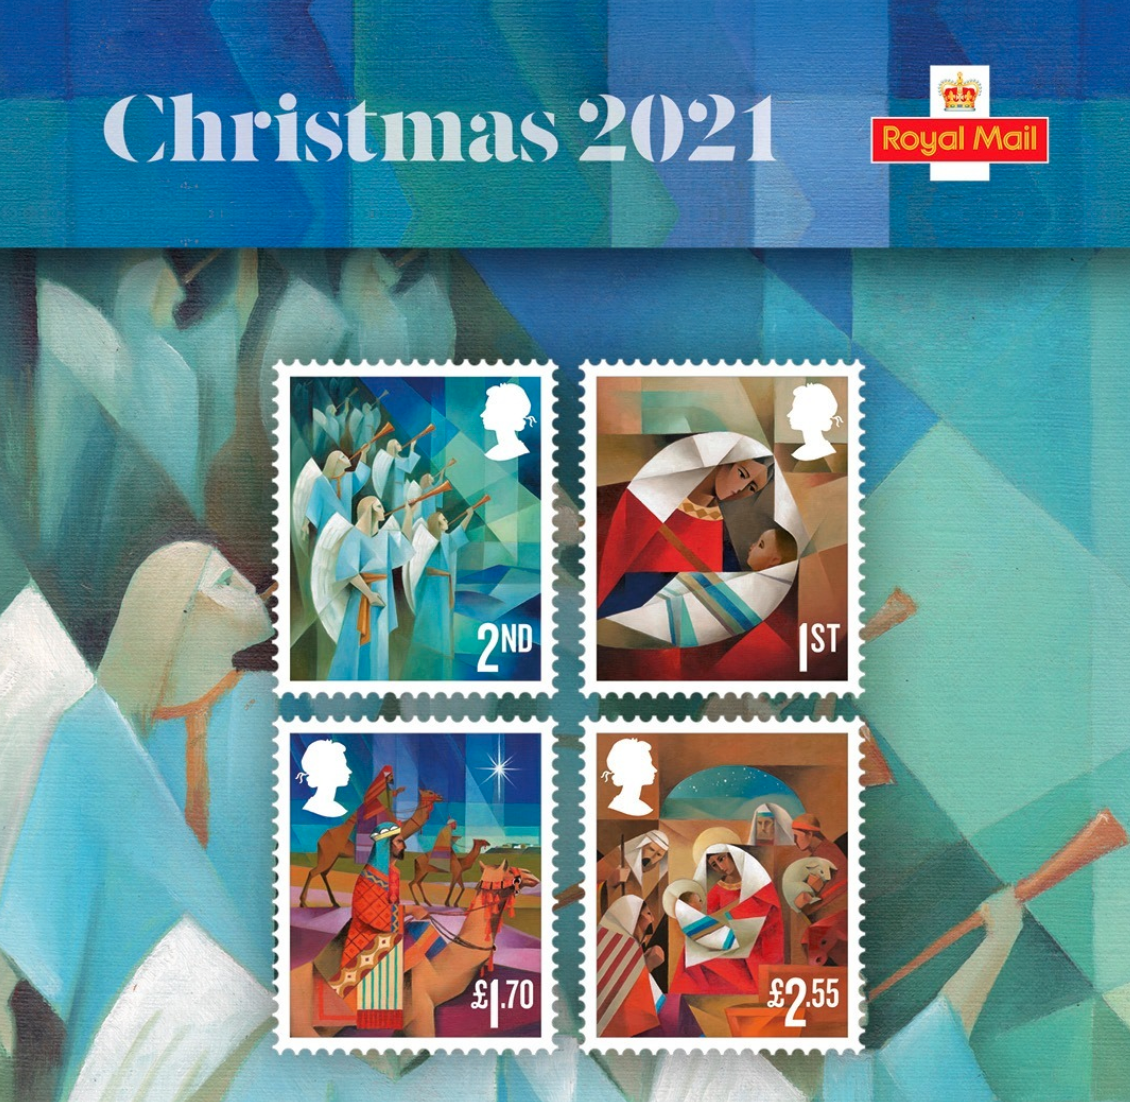 Above: Royal Mail will be encouraging everyone to post early for Christmas.